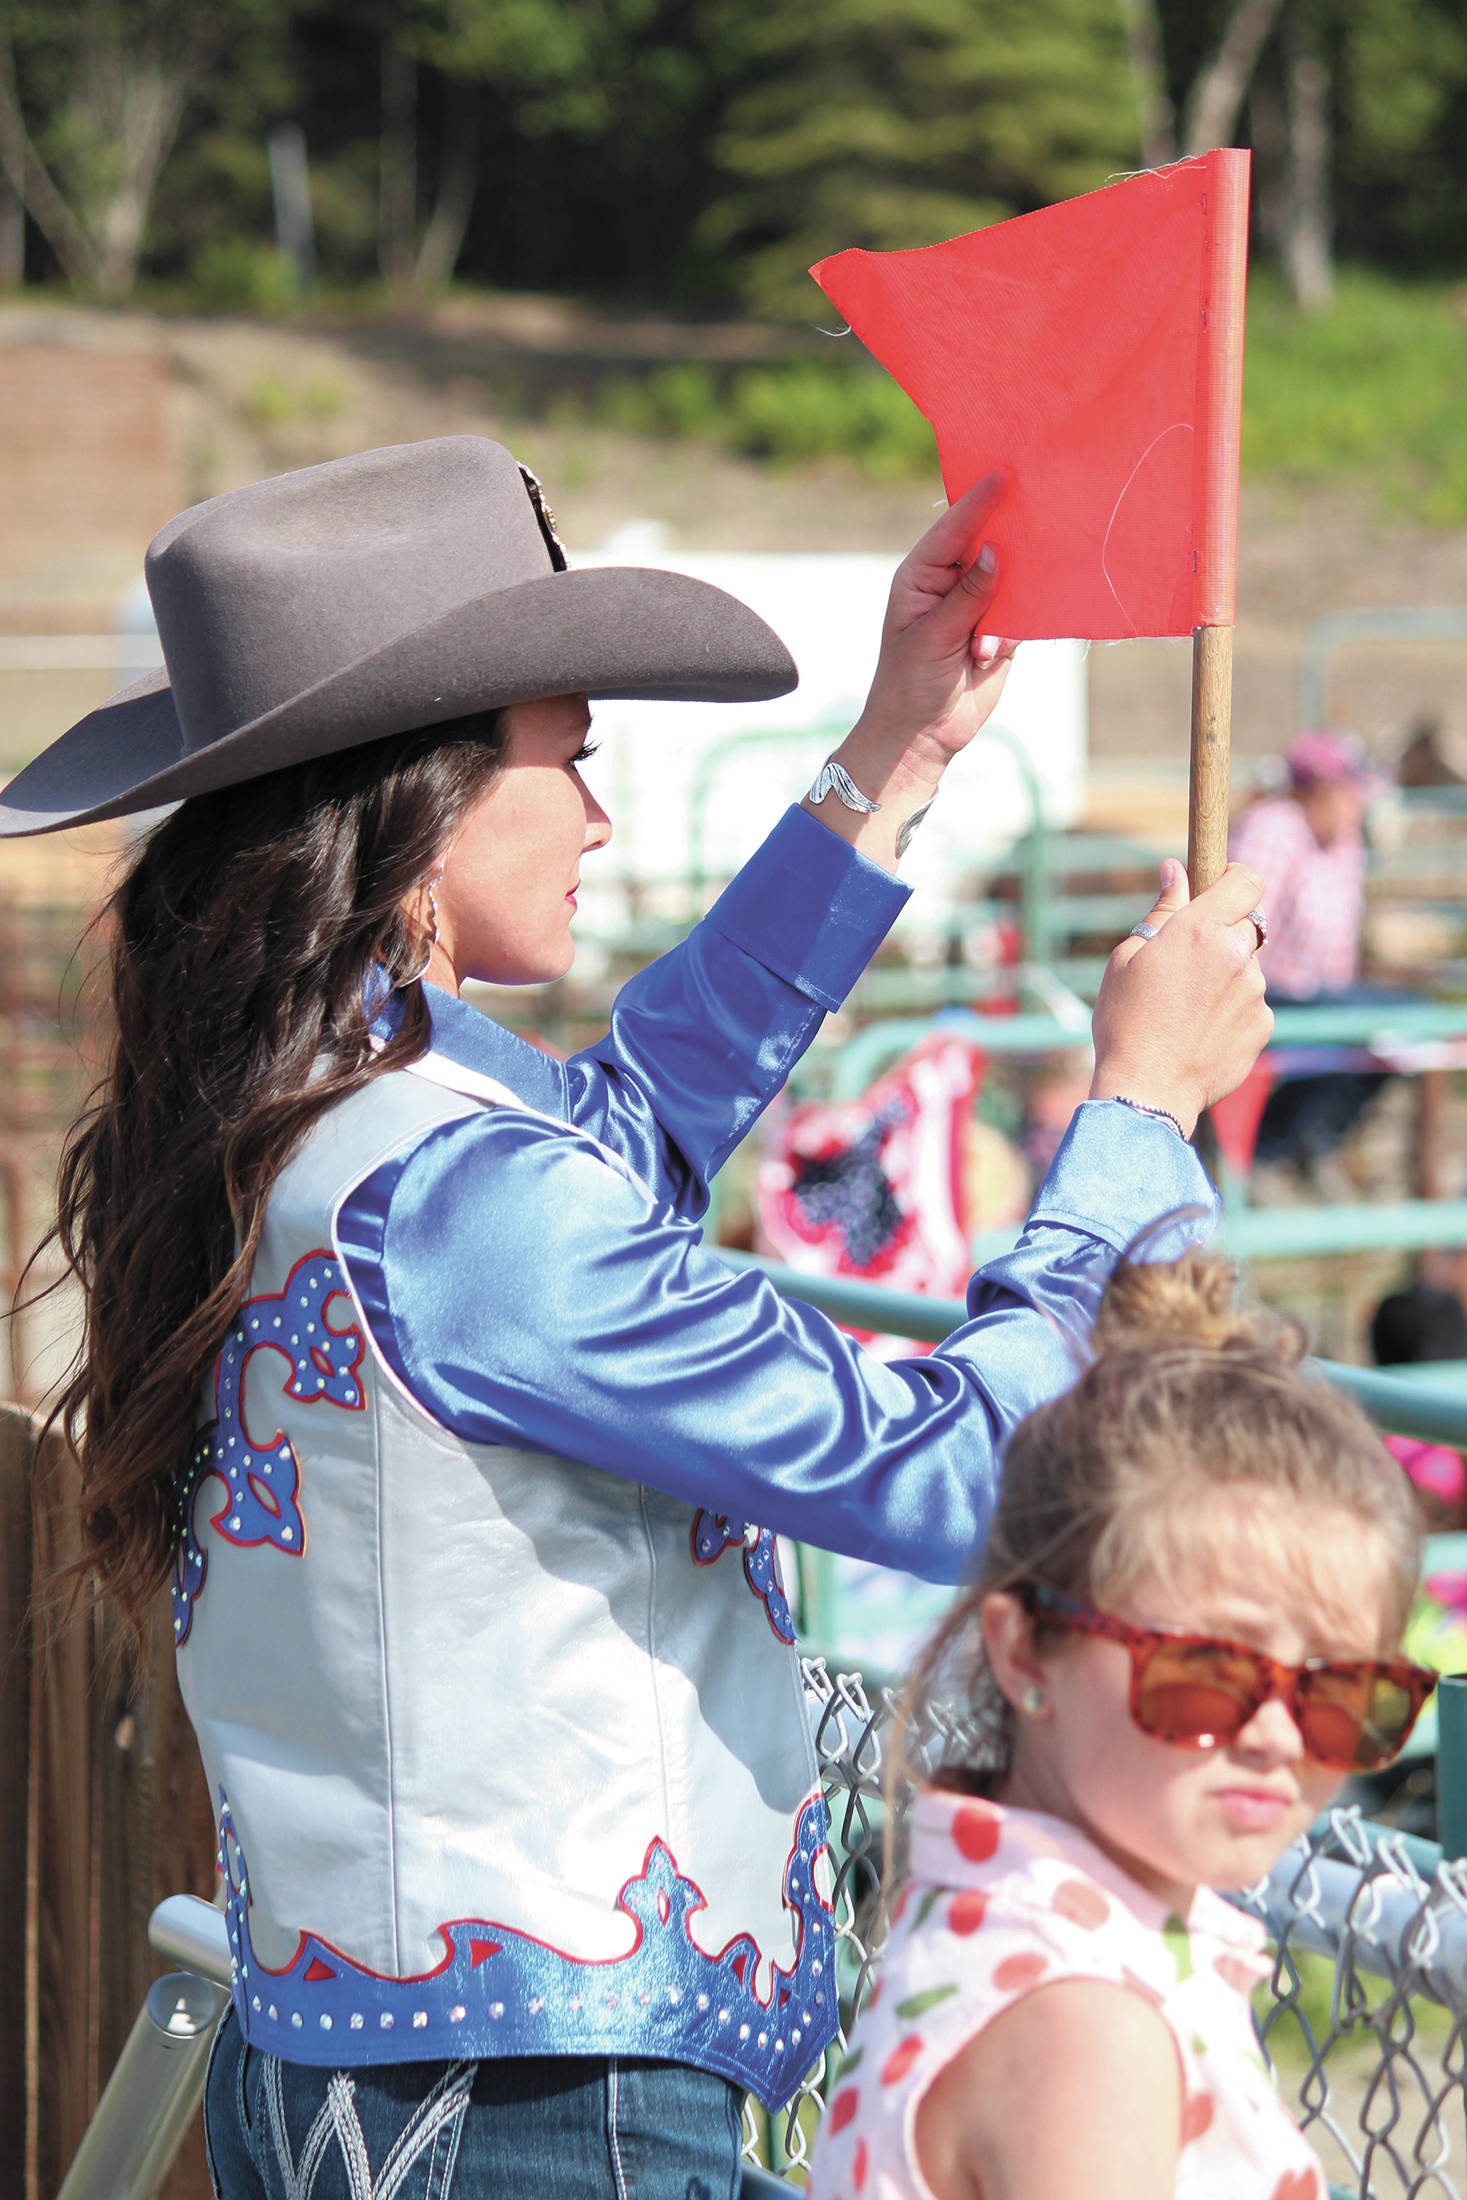 Kelsey Jo Konkright, Miss Rodeo Alaska 2020 of Anchorage, holds up a red flag, preparing to signal the start of an event, Saturday, July 4, 2020 during the Ninilchik Rodeo at the Kenai Peninsula Fairgrounds in Ninilchik, Alaska. (Photo by Megan Pacer/Homer News)